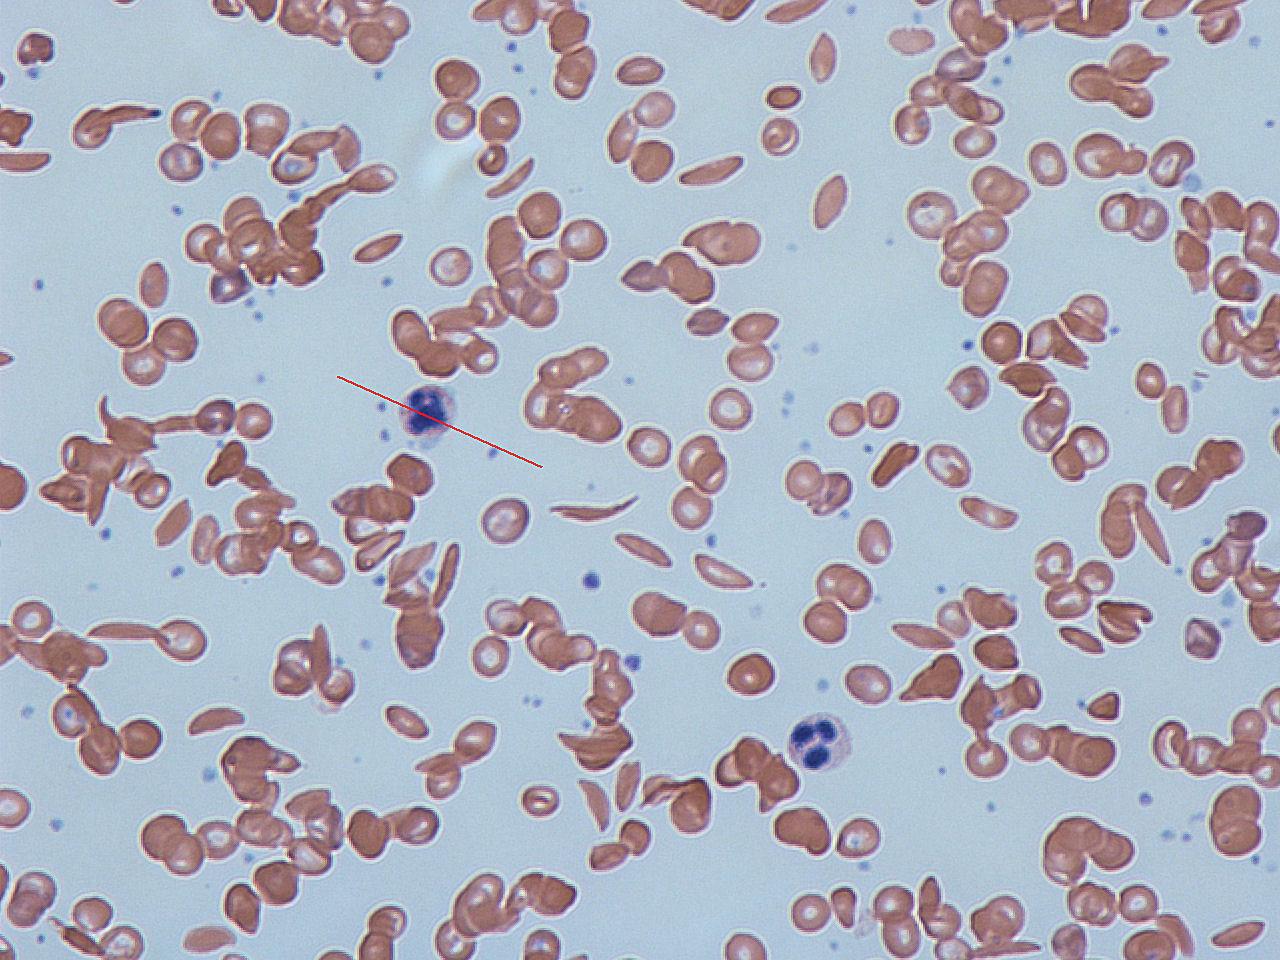 A series of red blood cells, some are sickle shaped